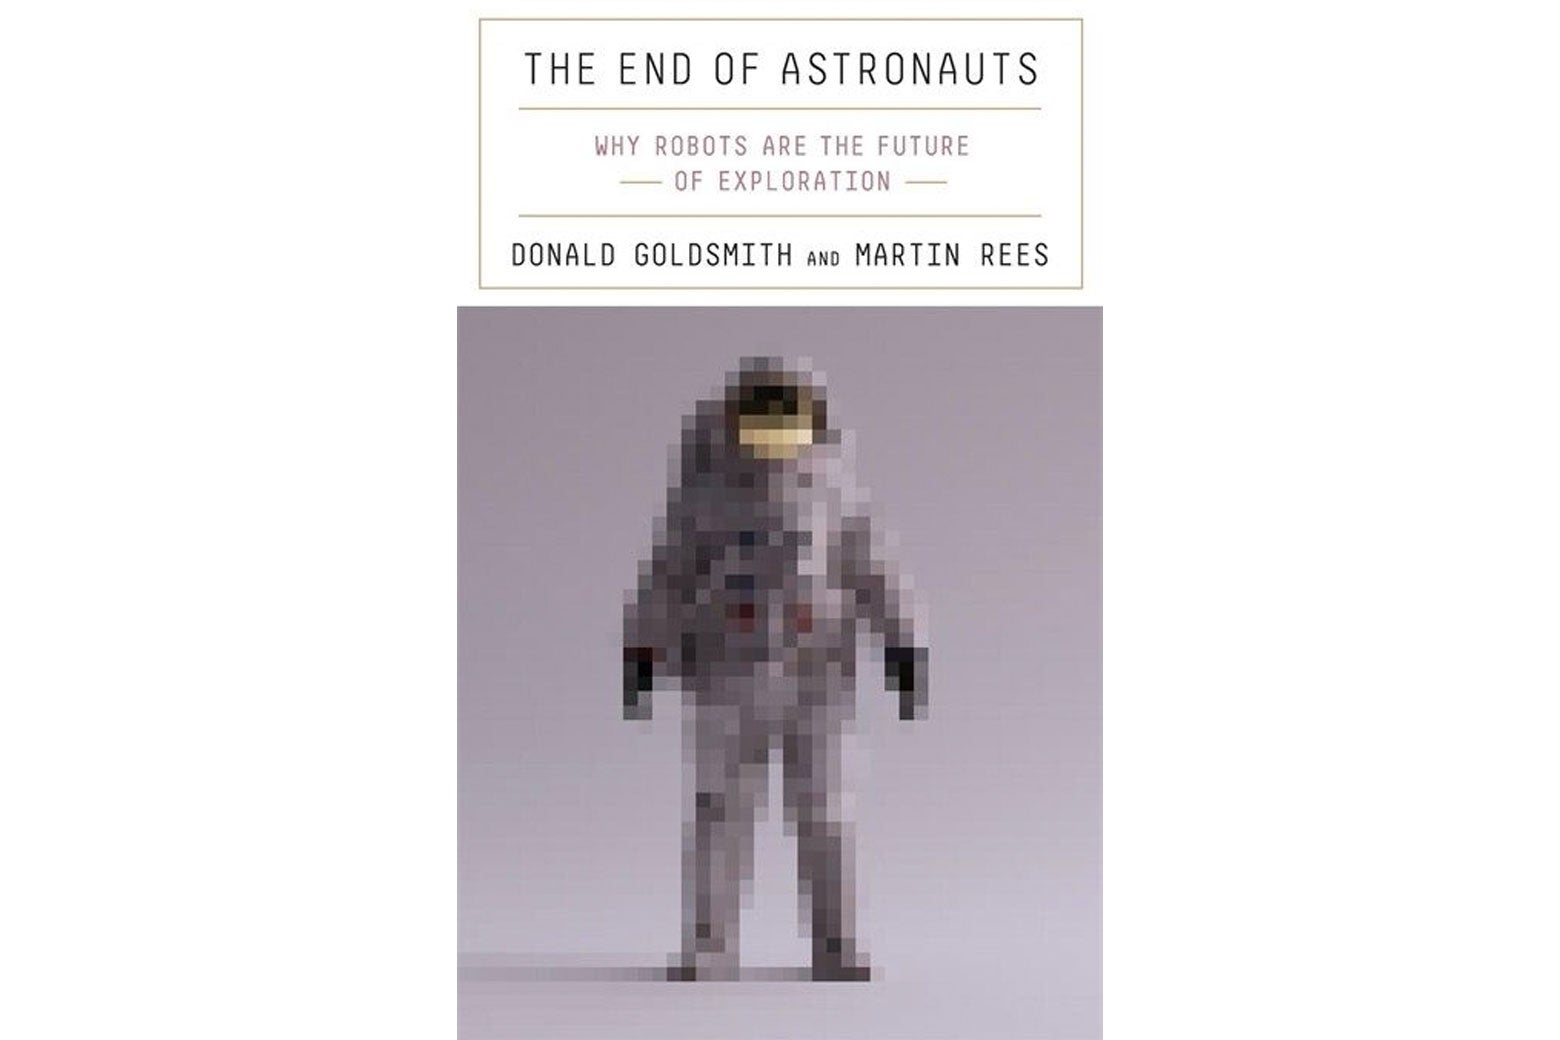 The End of Astronauts book cover with the title above a pixelated image of an astronaut against a gray background